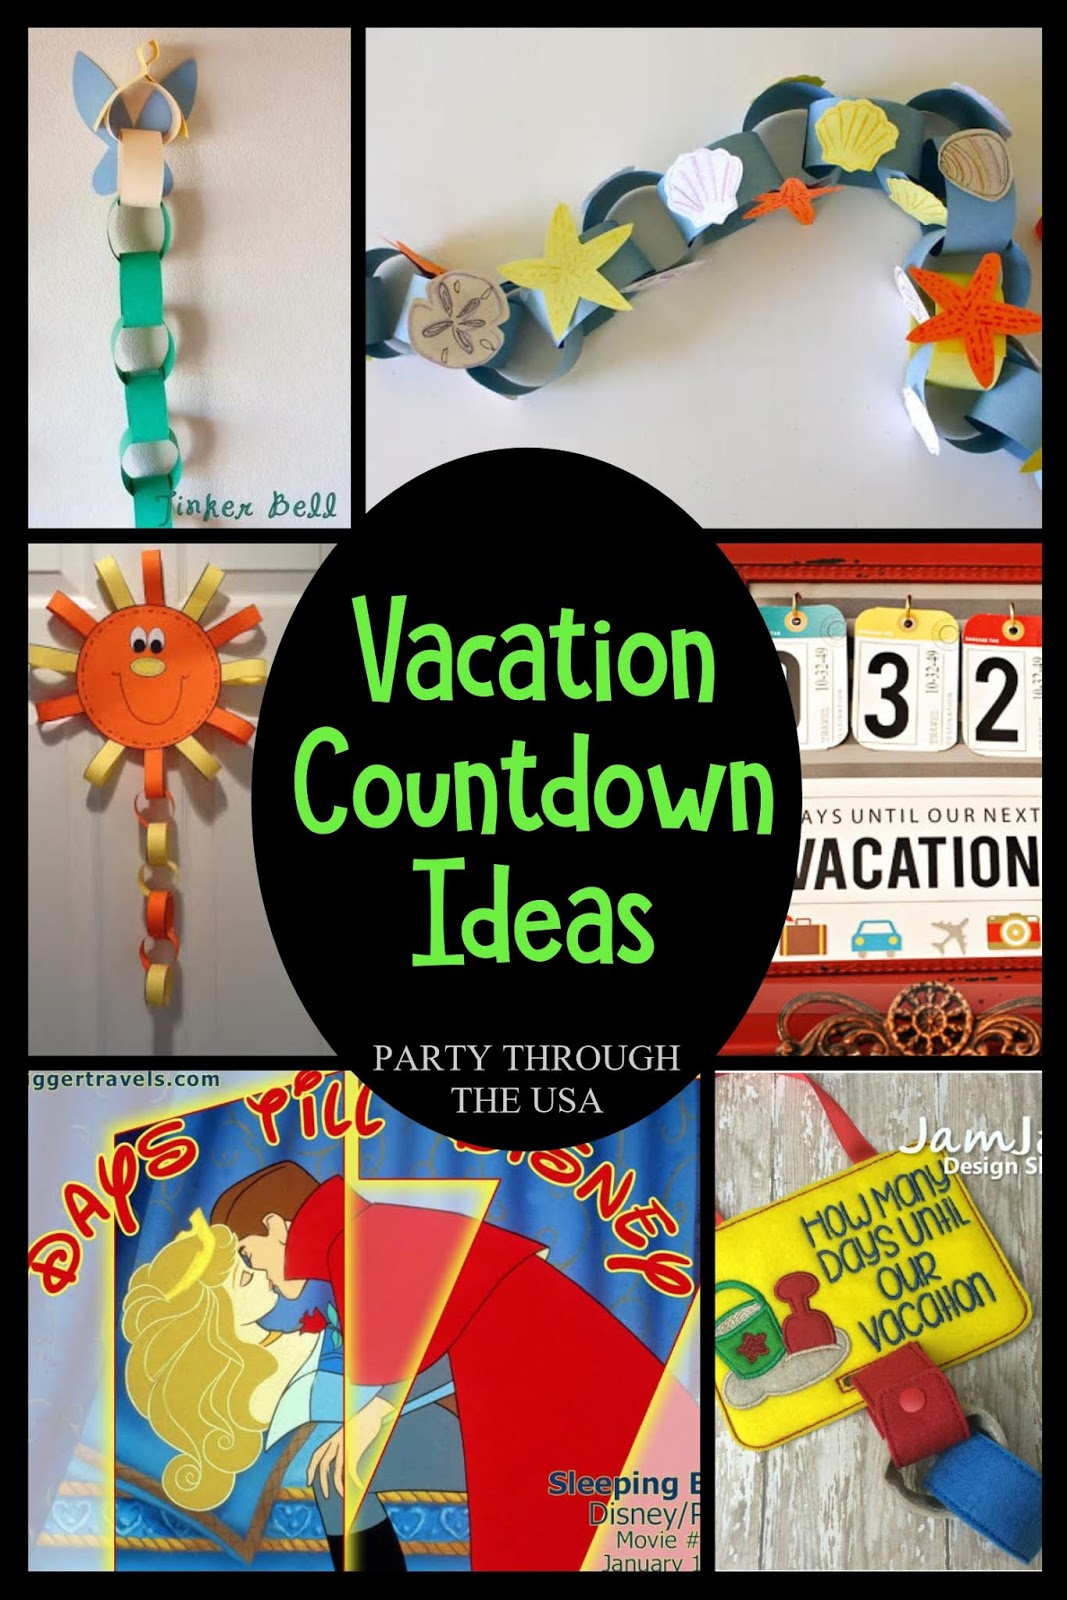 Vacation Countdown Ideas